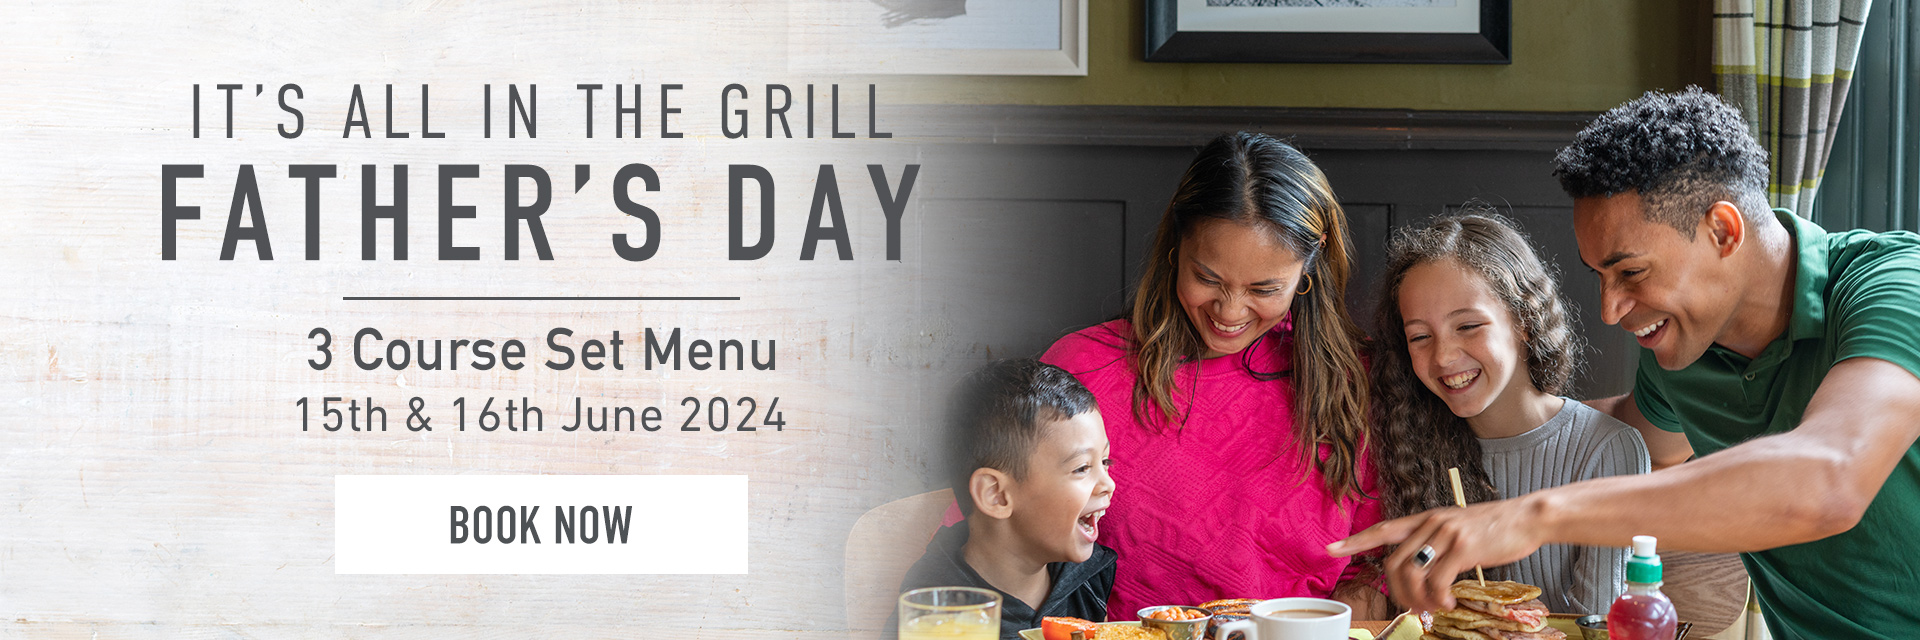 Father’s Day at Harvester Meadowhall